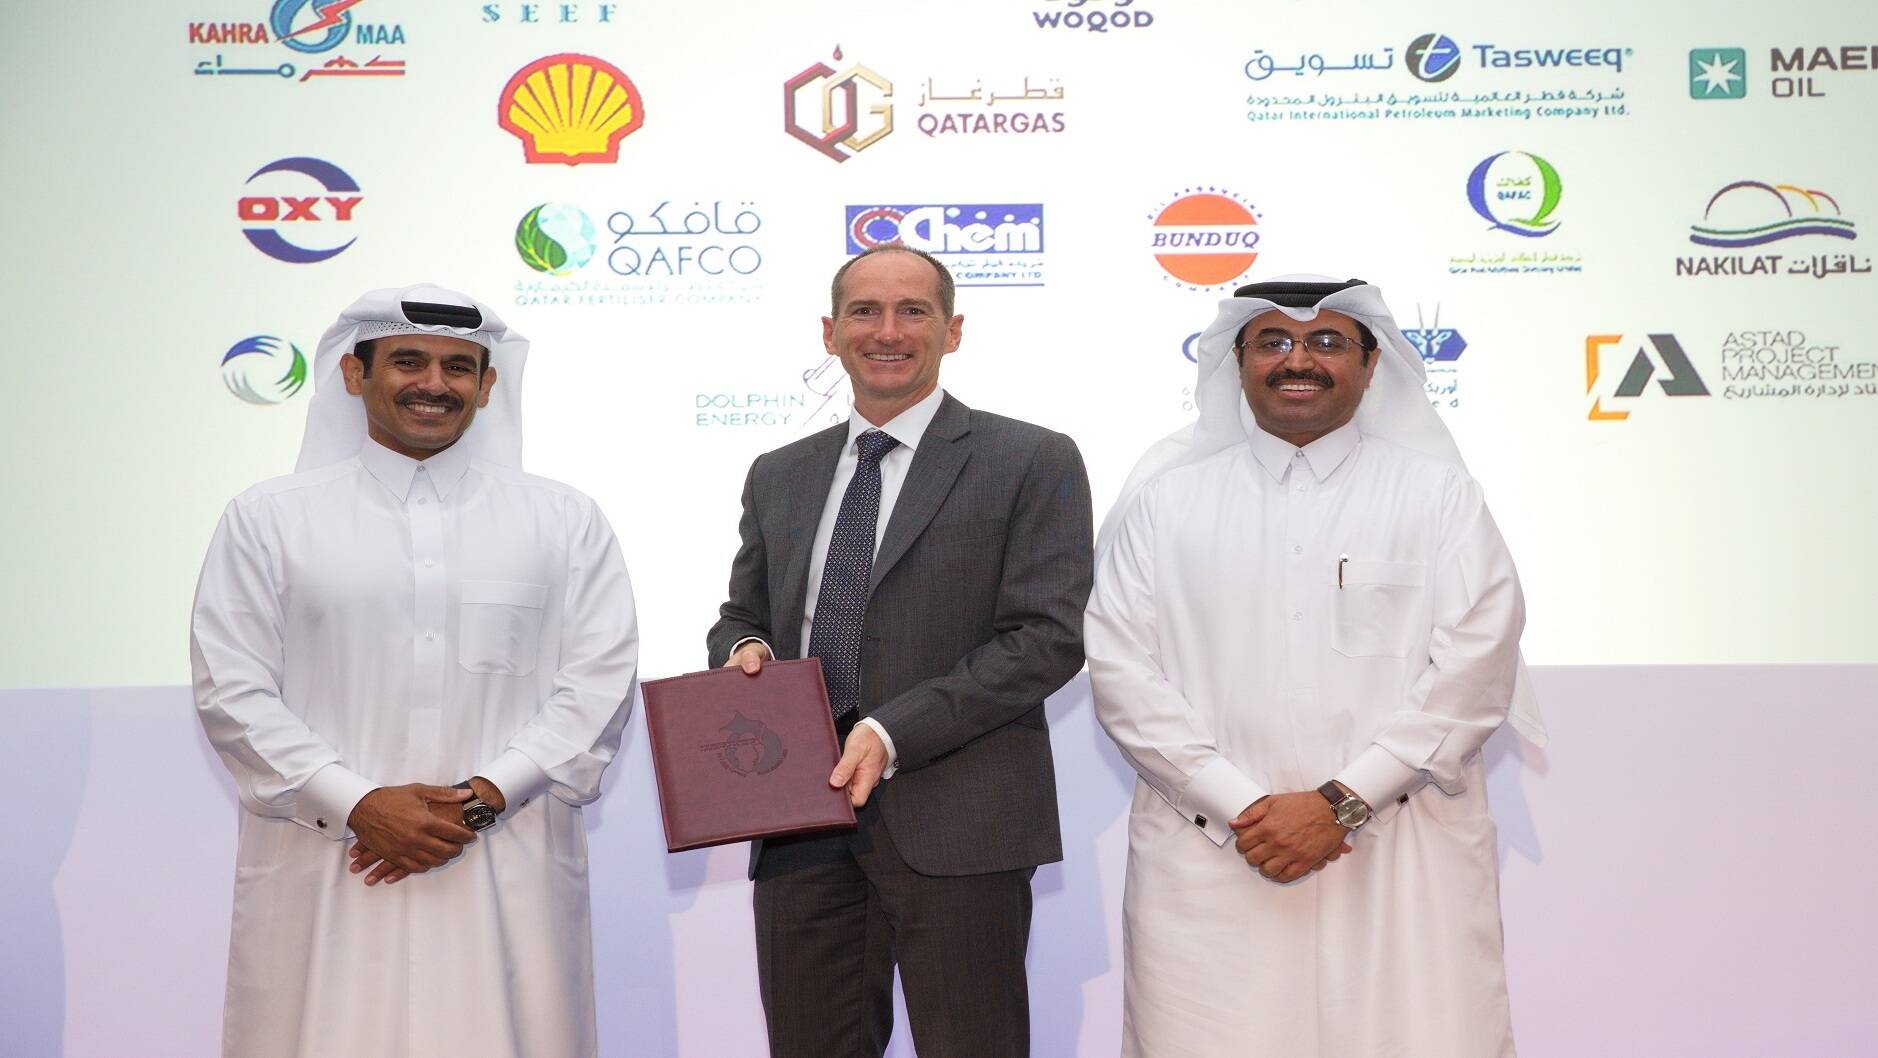 Image Photo  His Excellency Dr. Mohammed Bin Saleh Al-Sada, Minister of Energy and Industry, presented ExxonMobil Qatar with the 2015 Qatarization Certificate for the most improved organization in the category of supporting student sponsorship. Alistair Routledge, President and General Manager for ExxonMobil Qatar, accepted the award on behalf of the company.